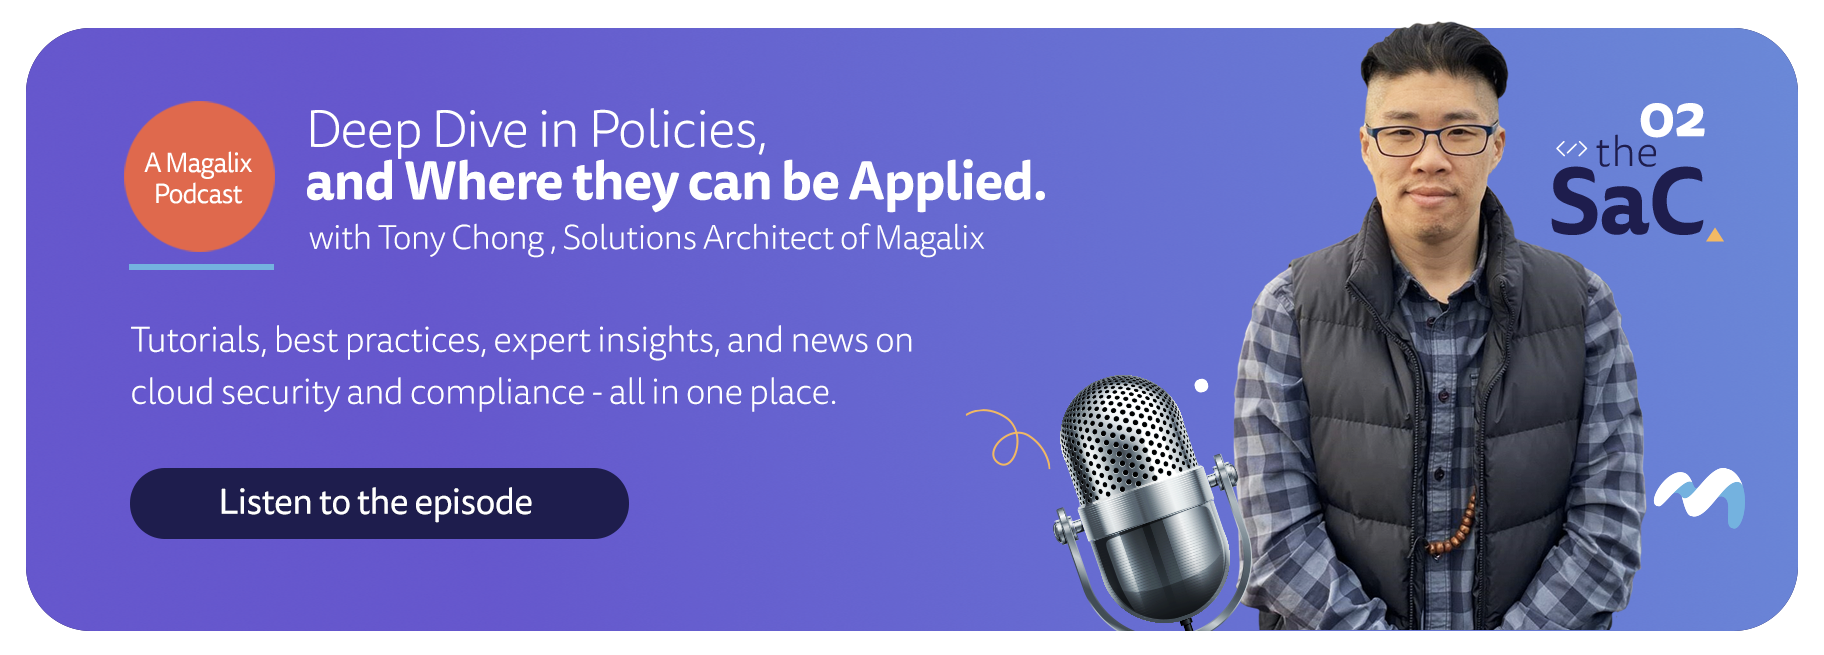 https://www.magalix.com/blog/deep-dive-in-policies-and-where-they-can-be-applied-the-sac-podcast